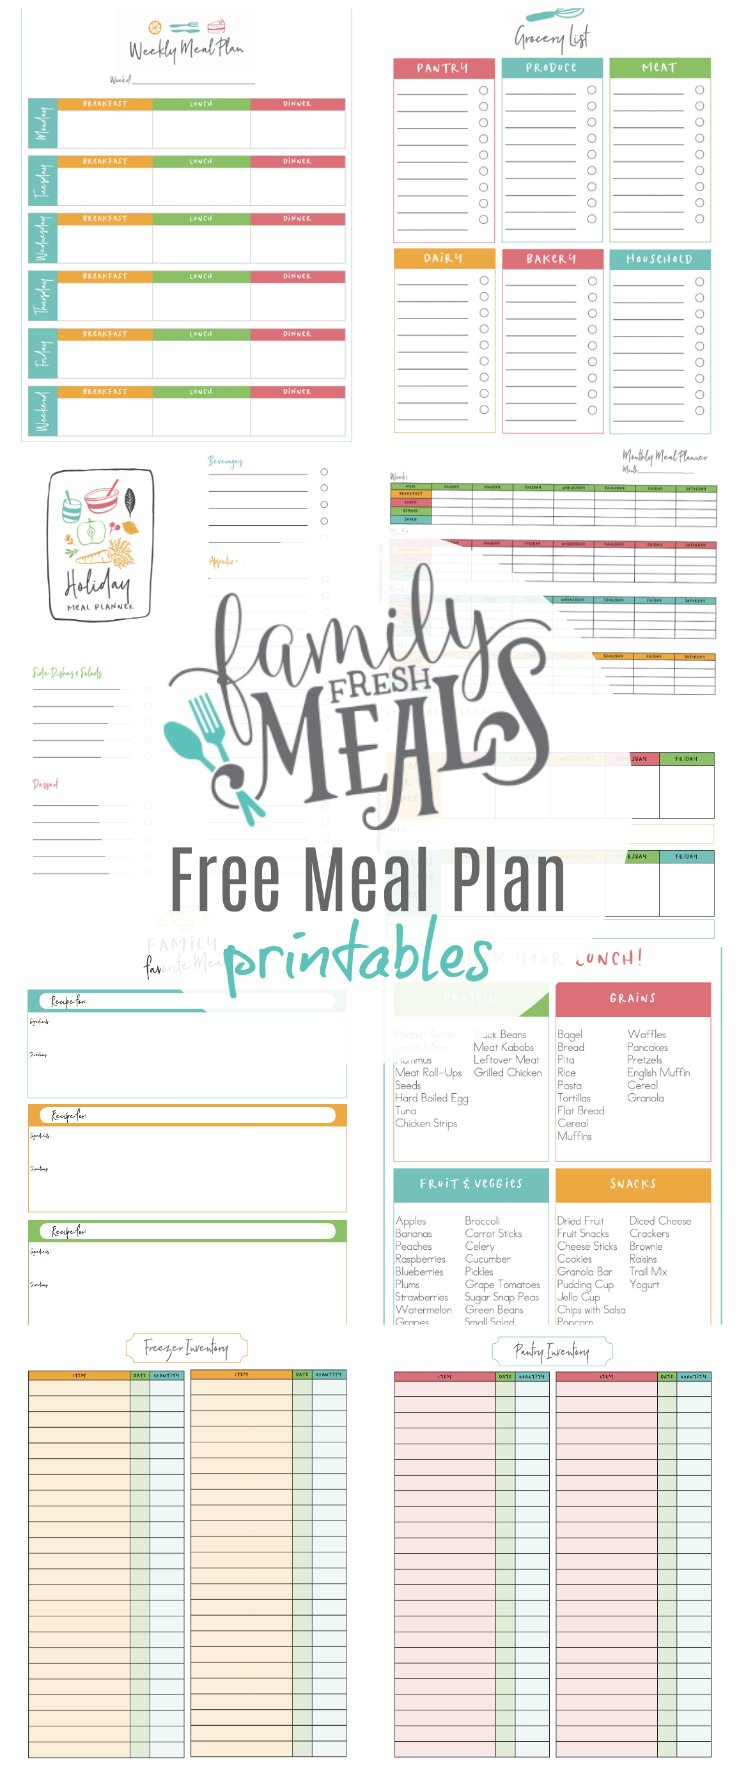 Free Meal Plan Printables - Family Fresh Meals - Free Printable Diet Planner